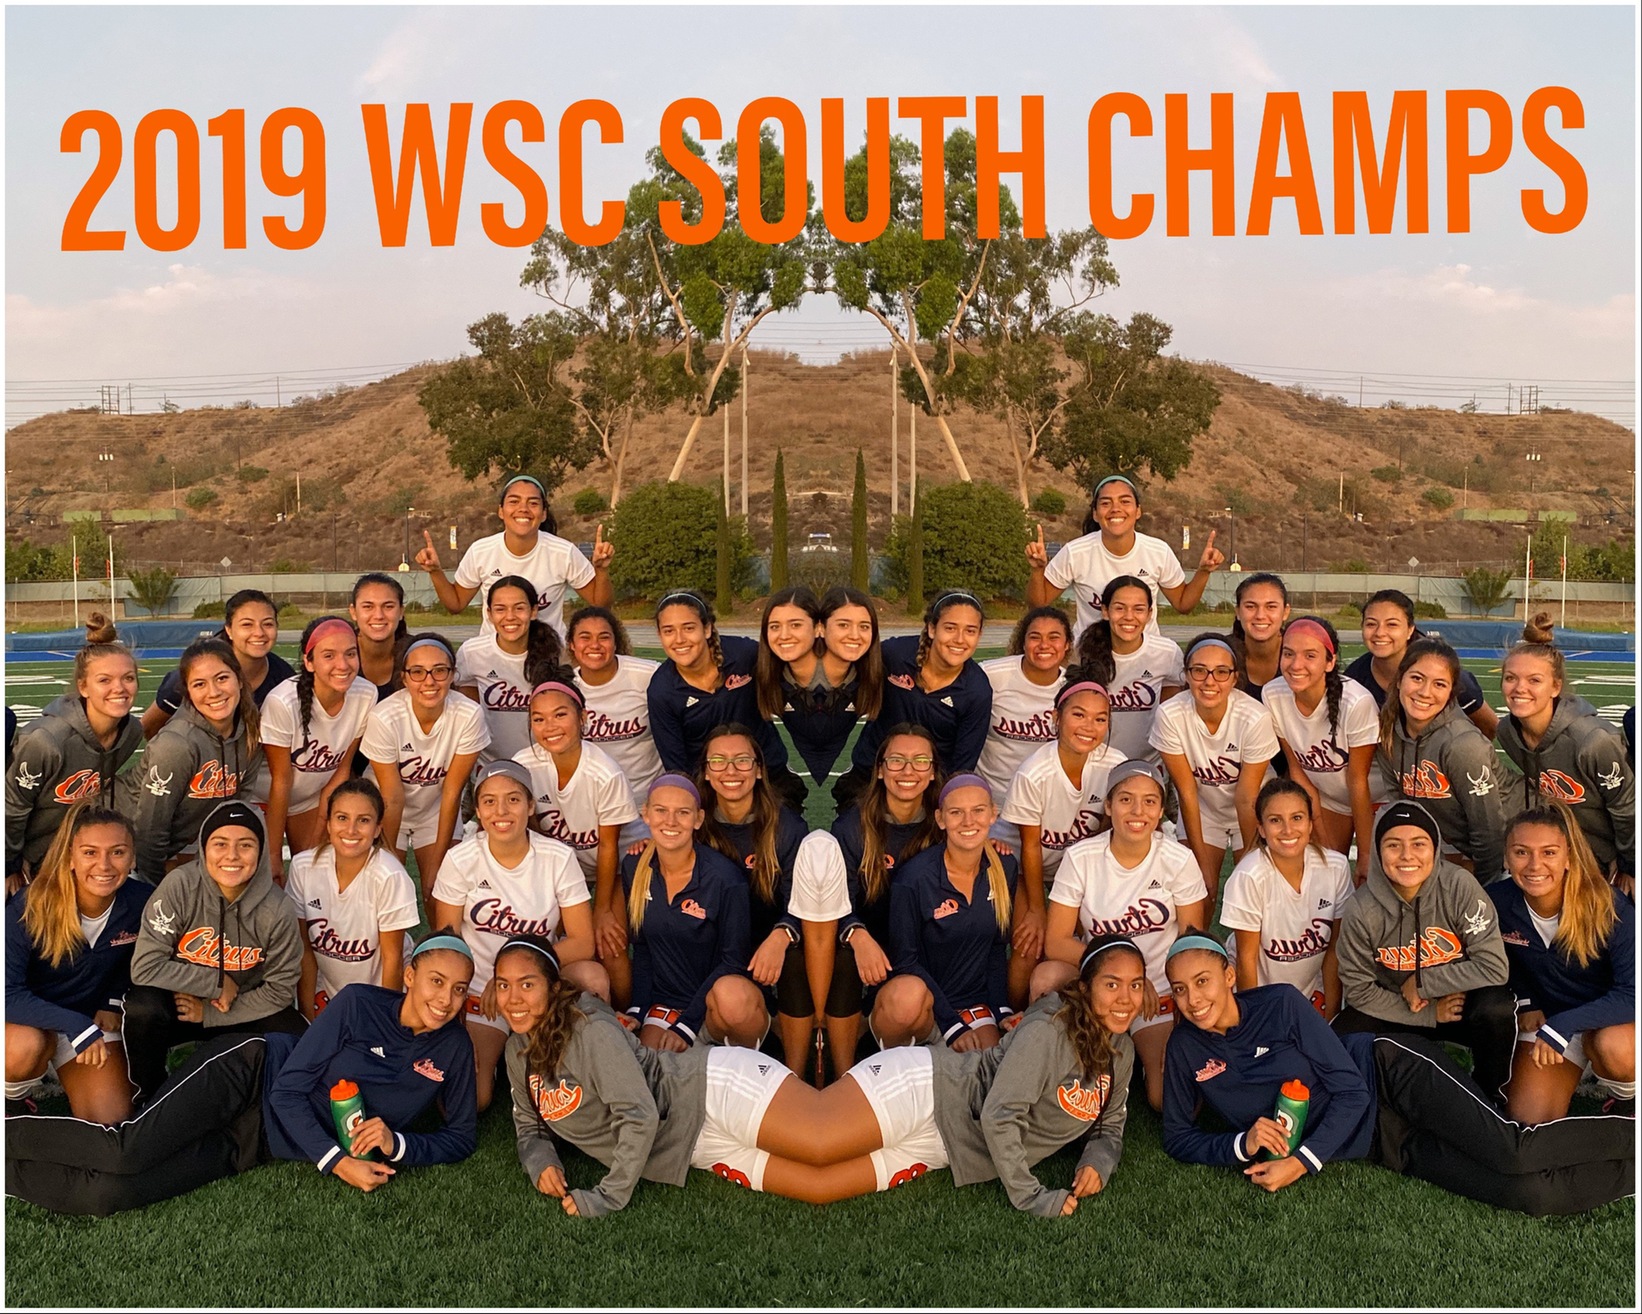 The Citrus College Women's Soccer team won their first ever WSC Championship on Friday.